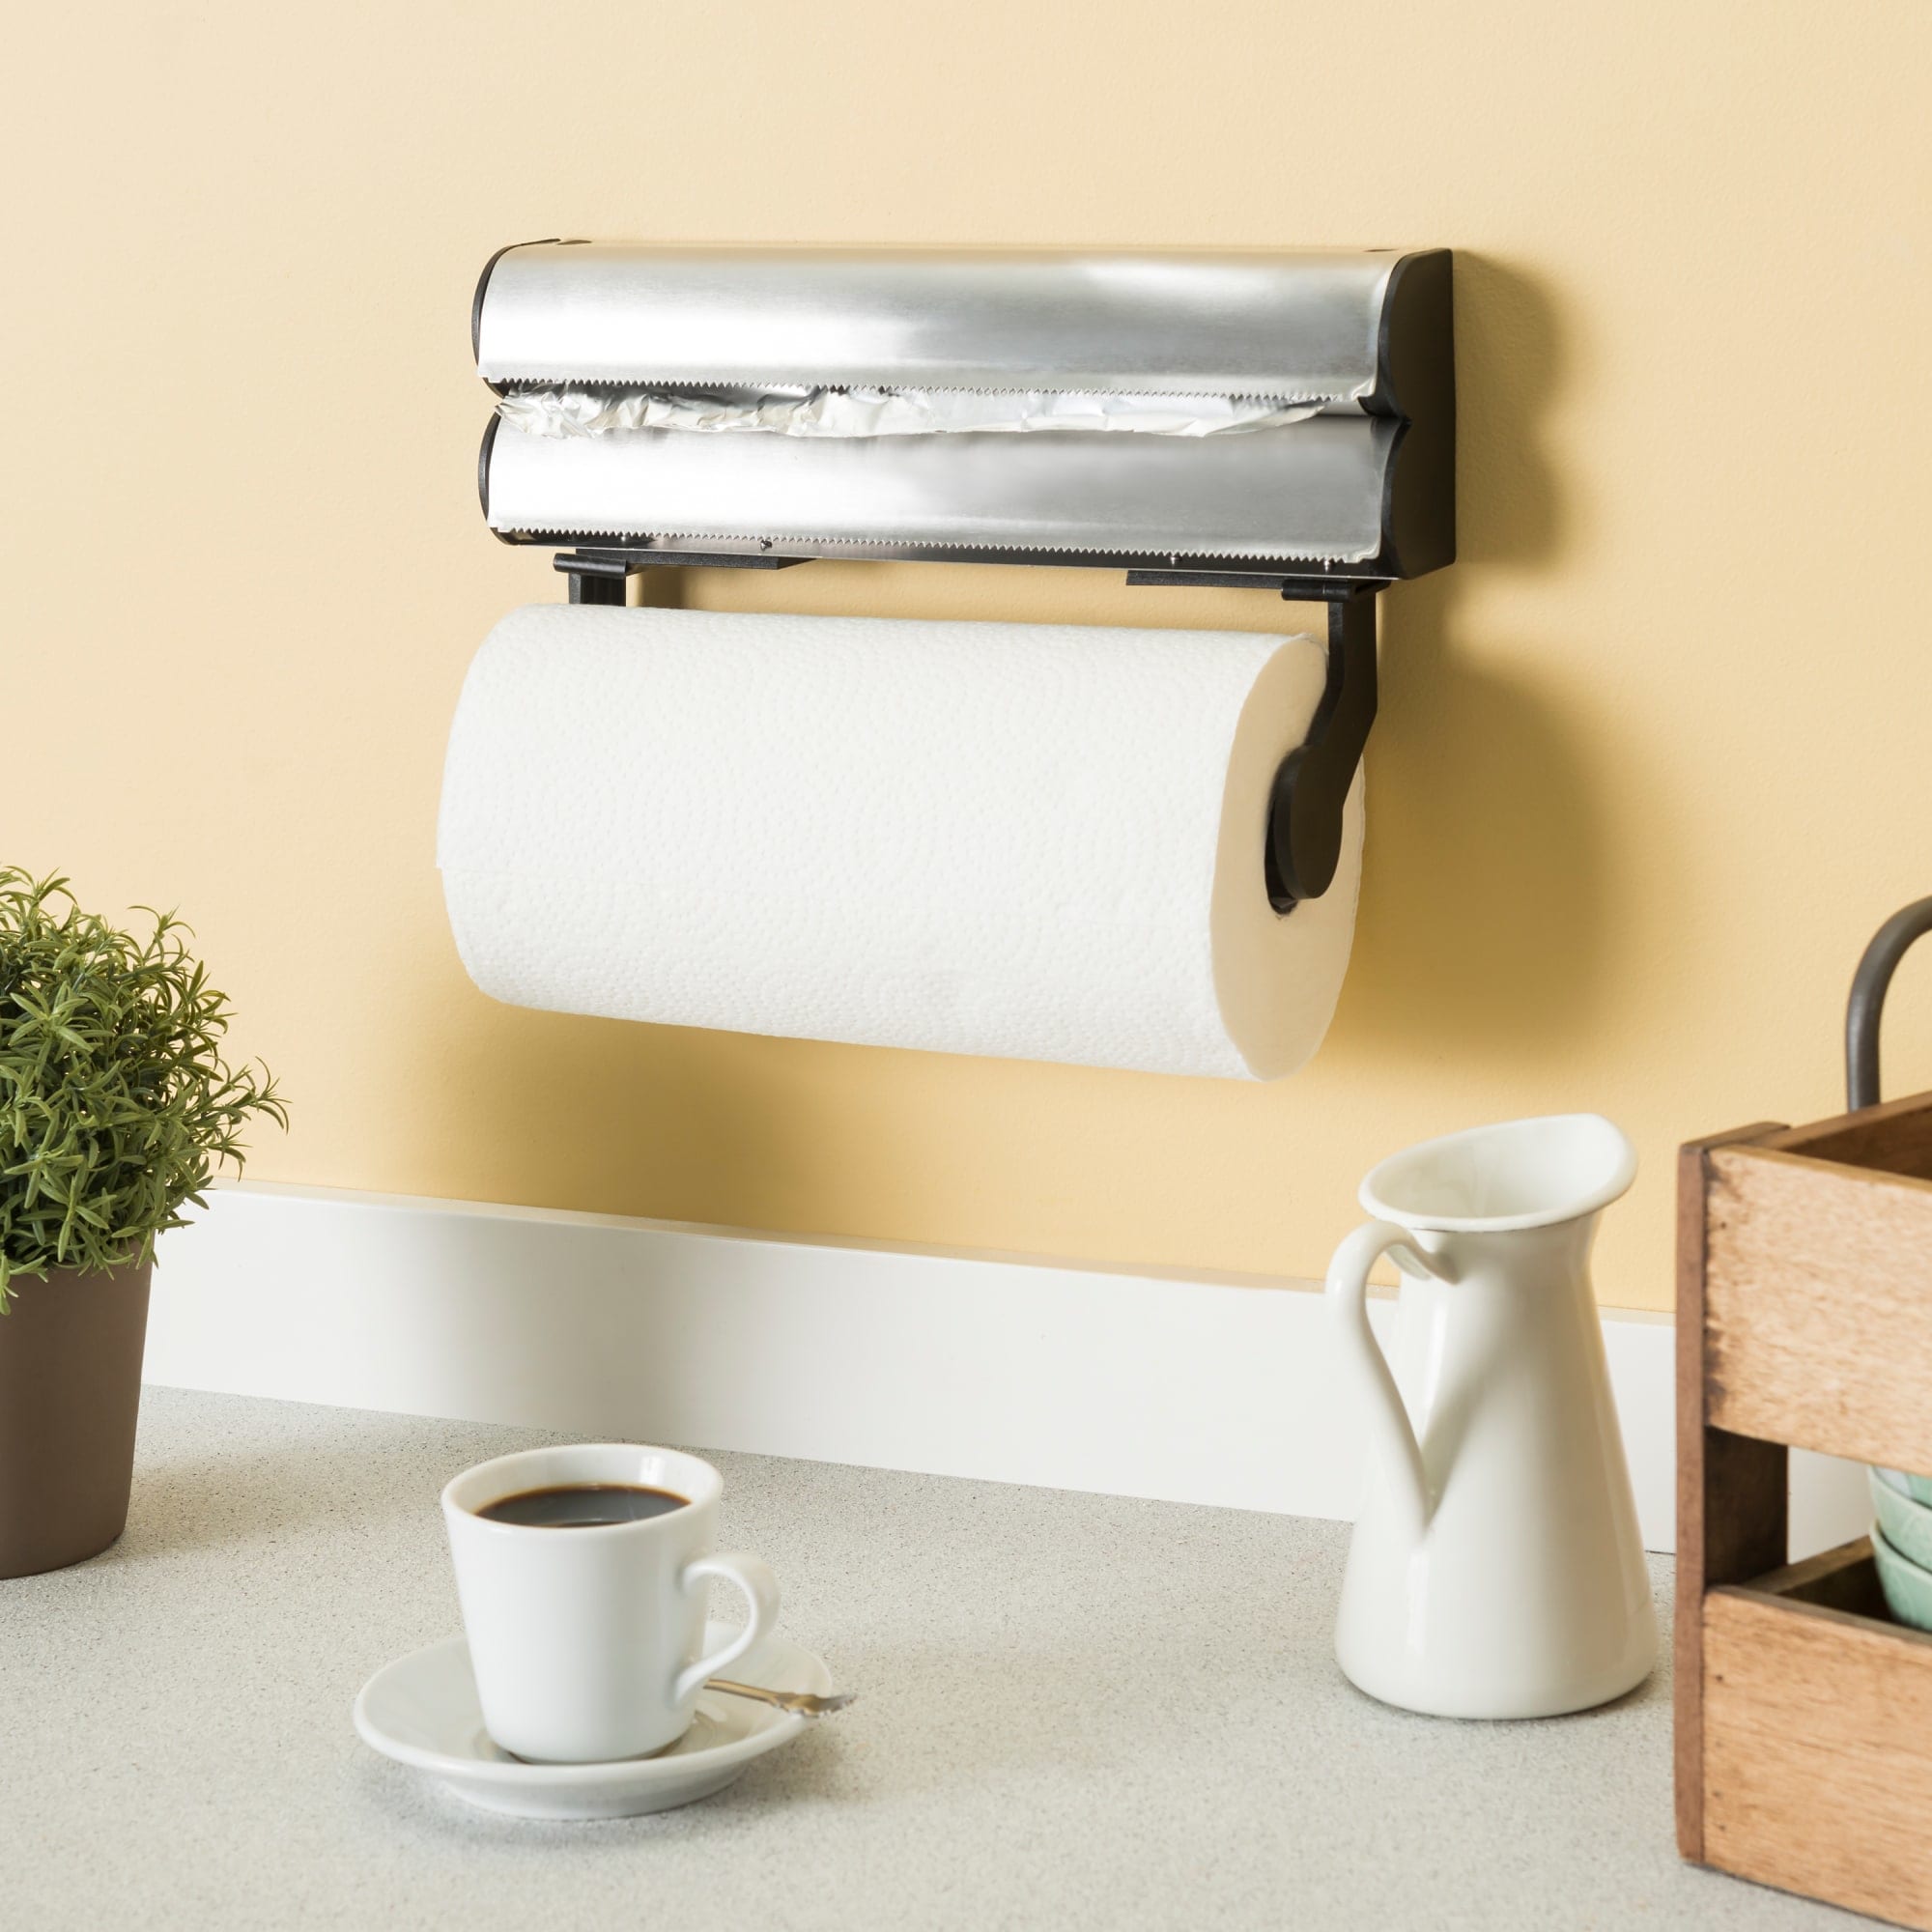 Metal Wall / Under Cabinet Mounted Paper Towel Holder